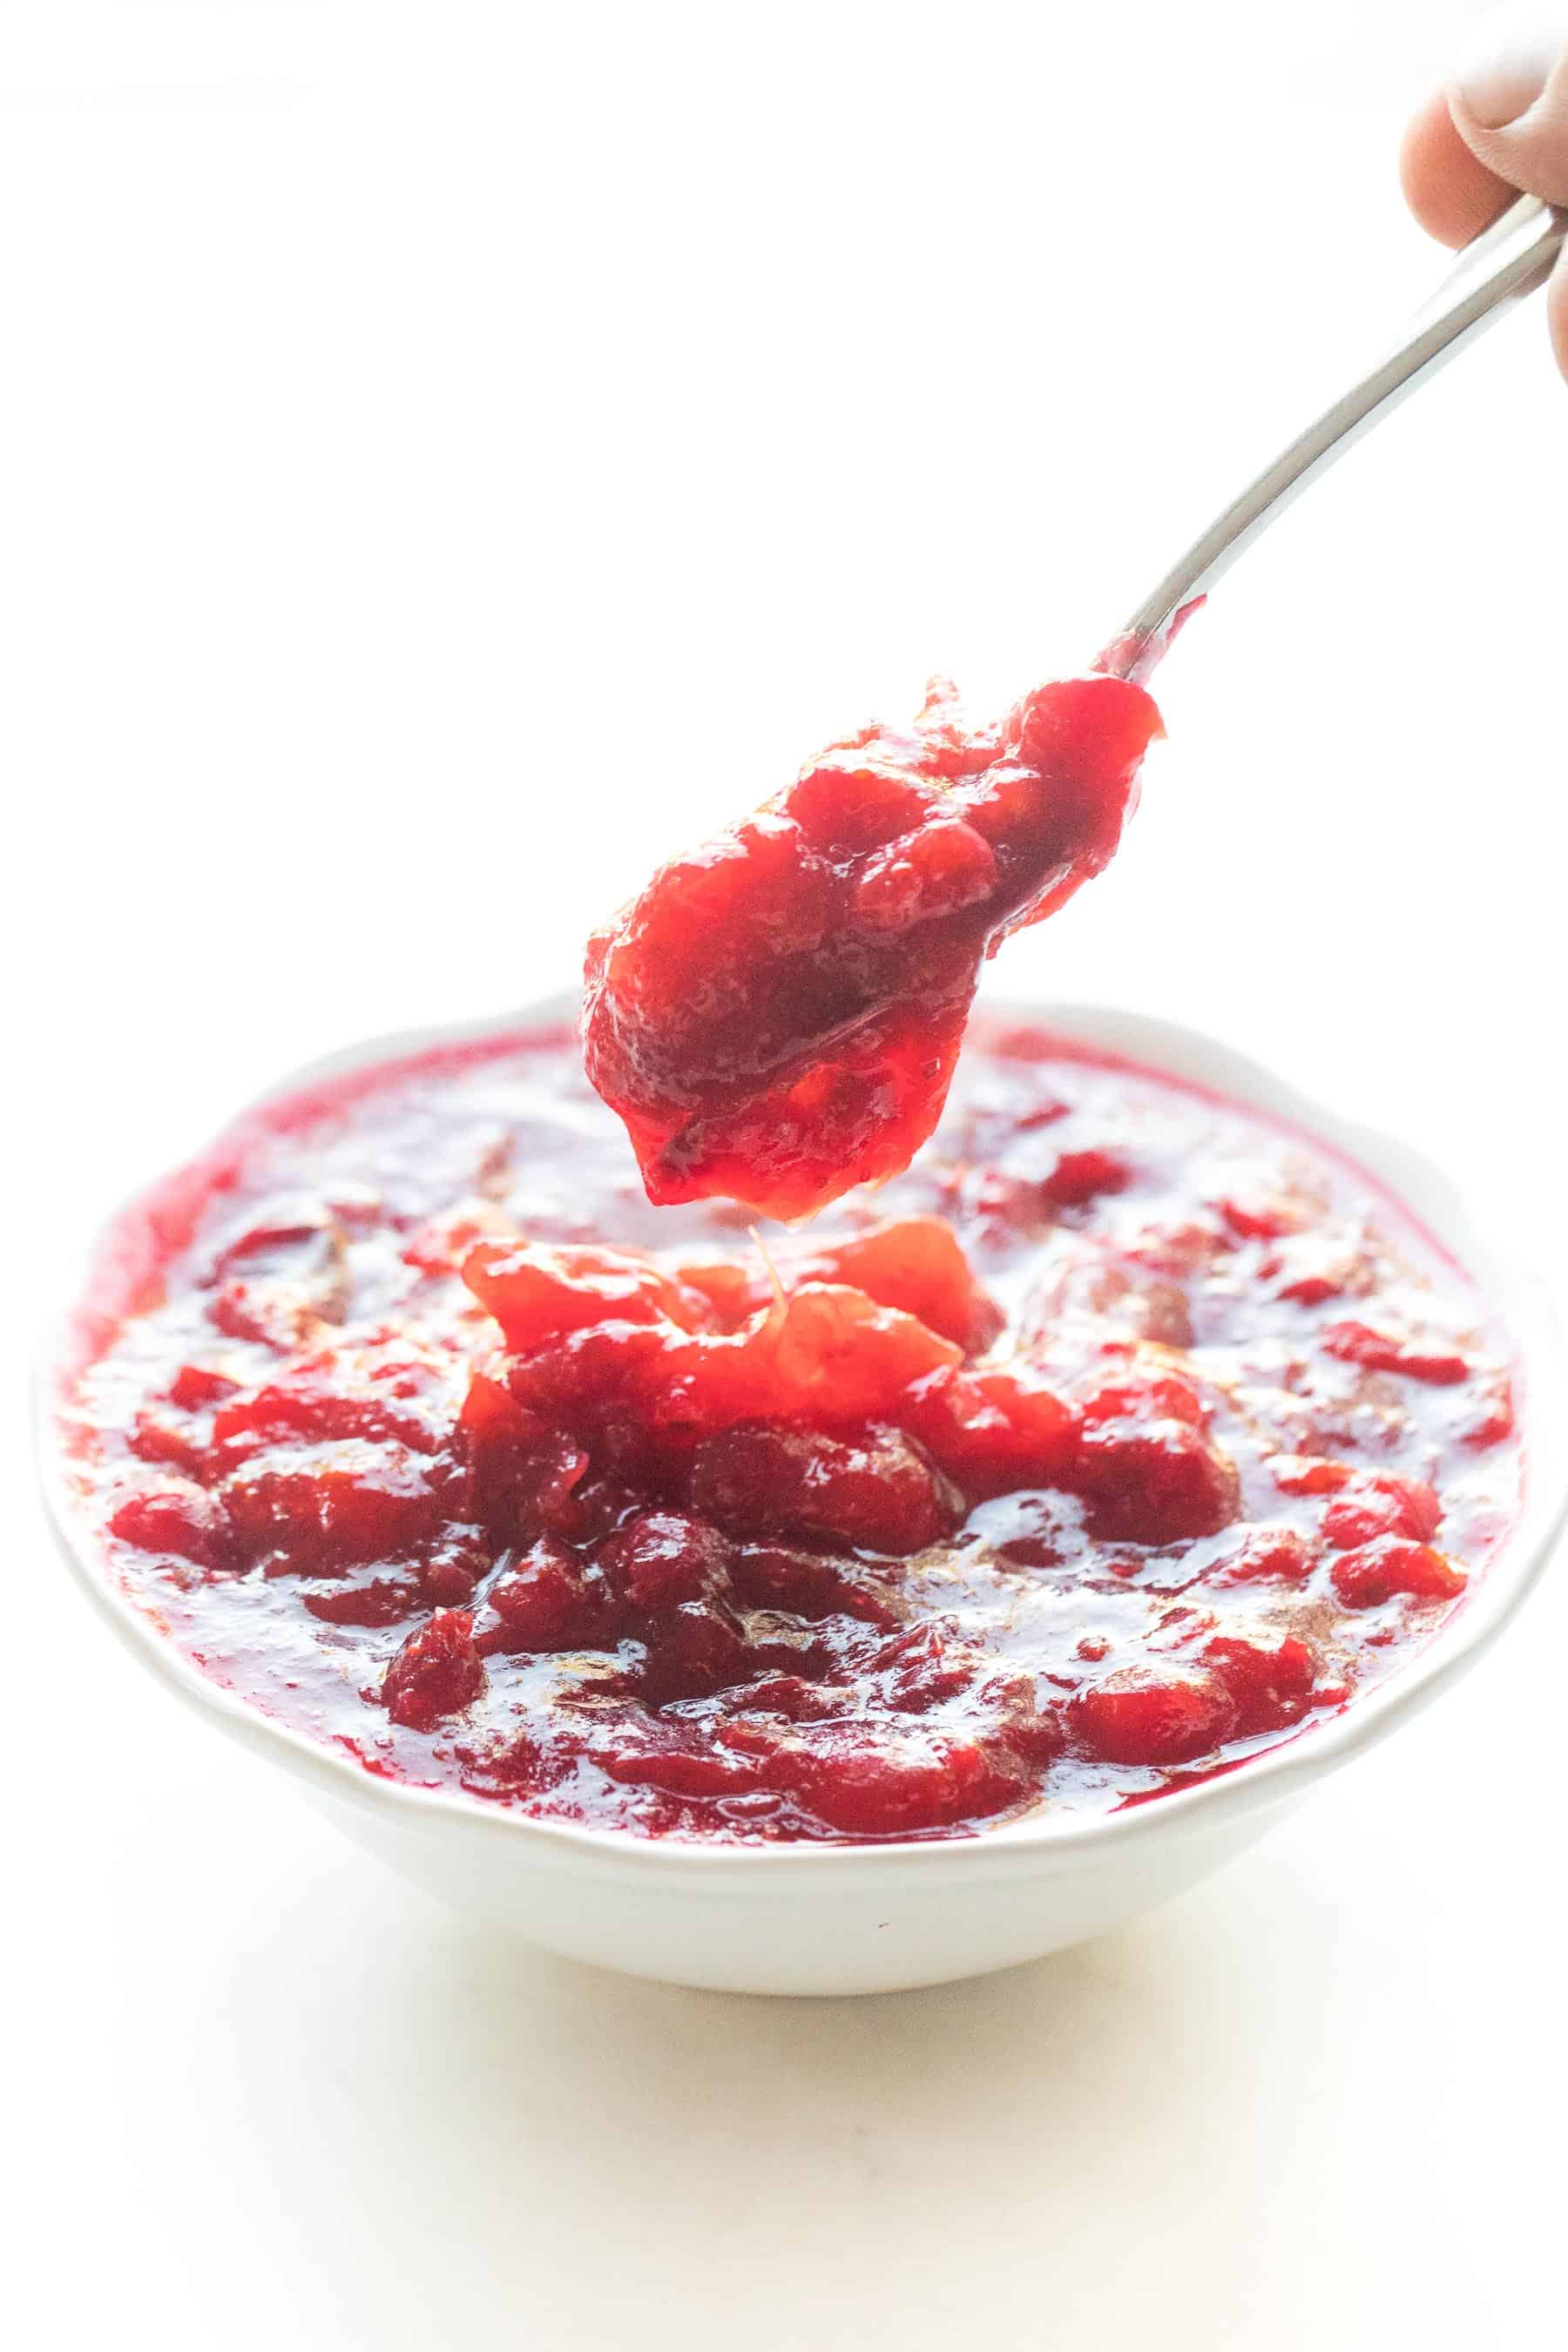 spoon dripping cranberry sauce in a white bowl